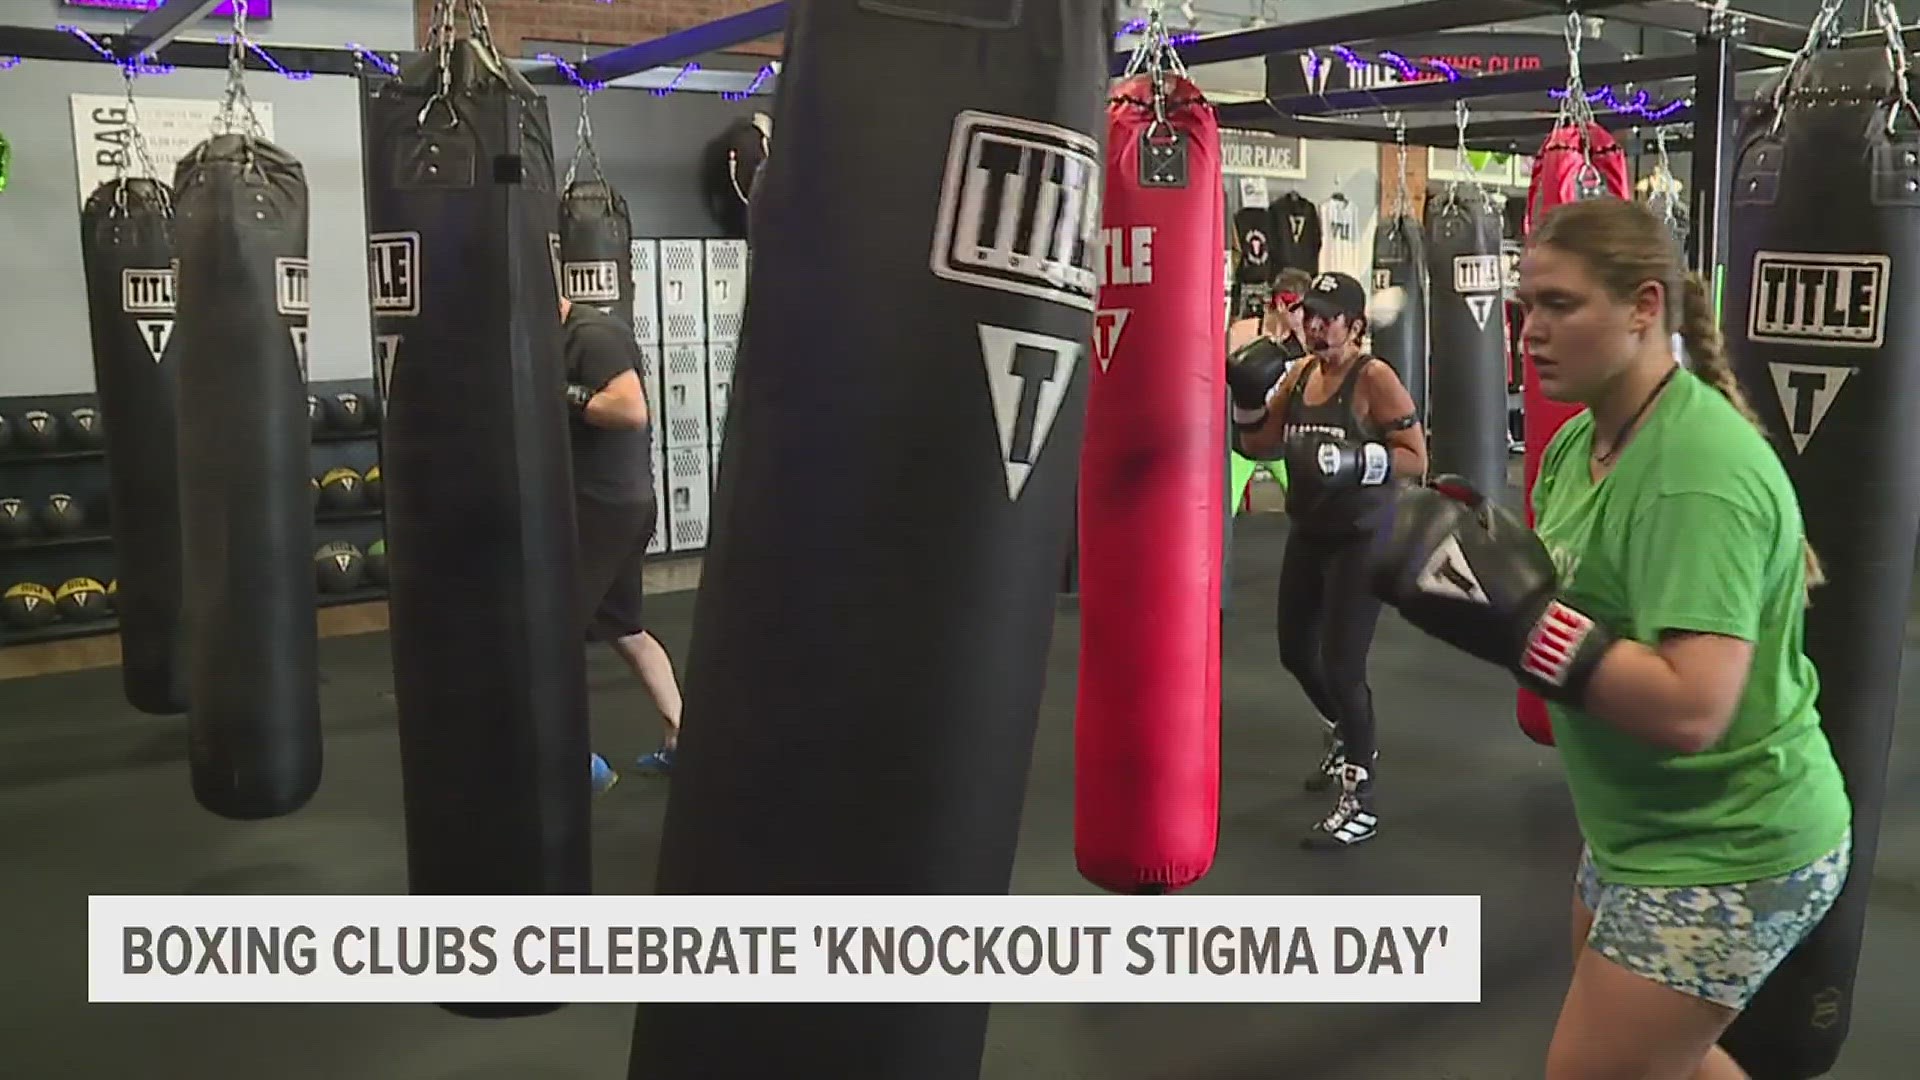 TITLE Boxing Clubs across the nation are knocking out the stigma when discussing mental health.